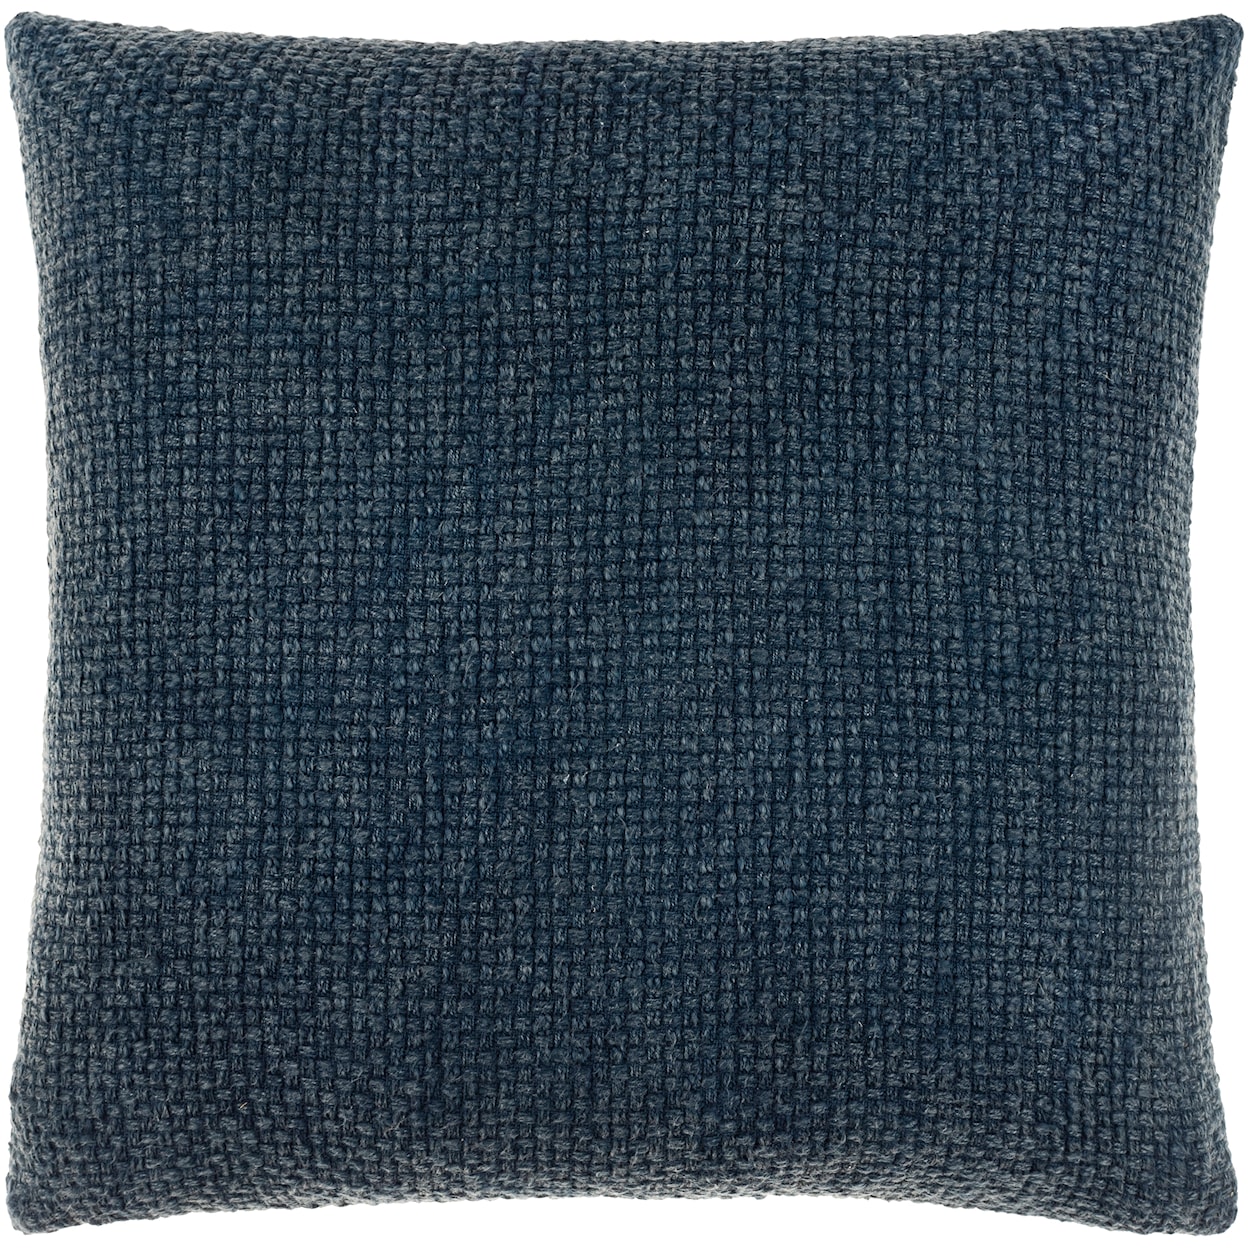 Ruby-Gordon Accents Washed Texture Pillow Kit